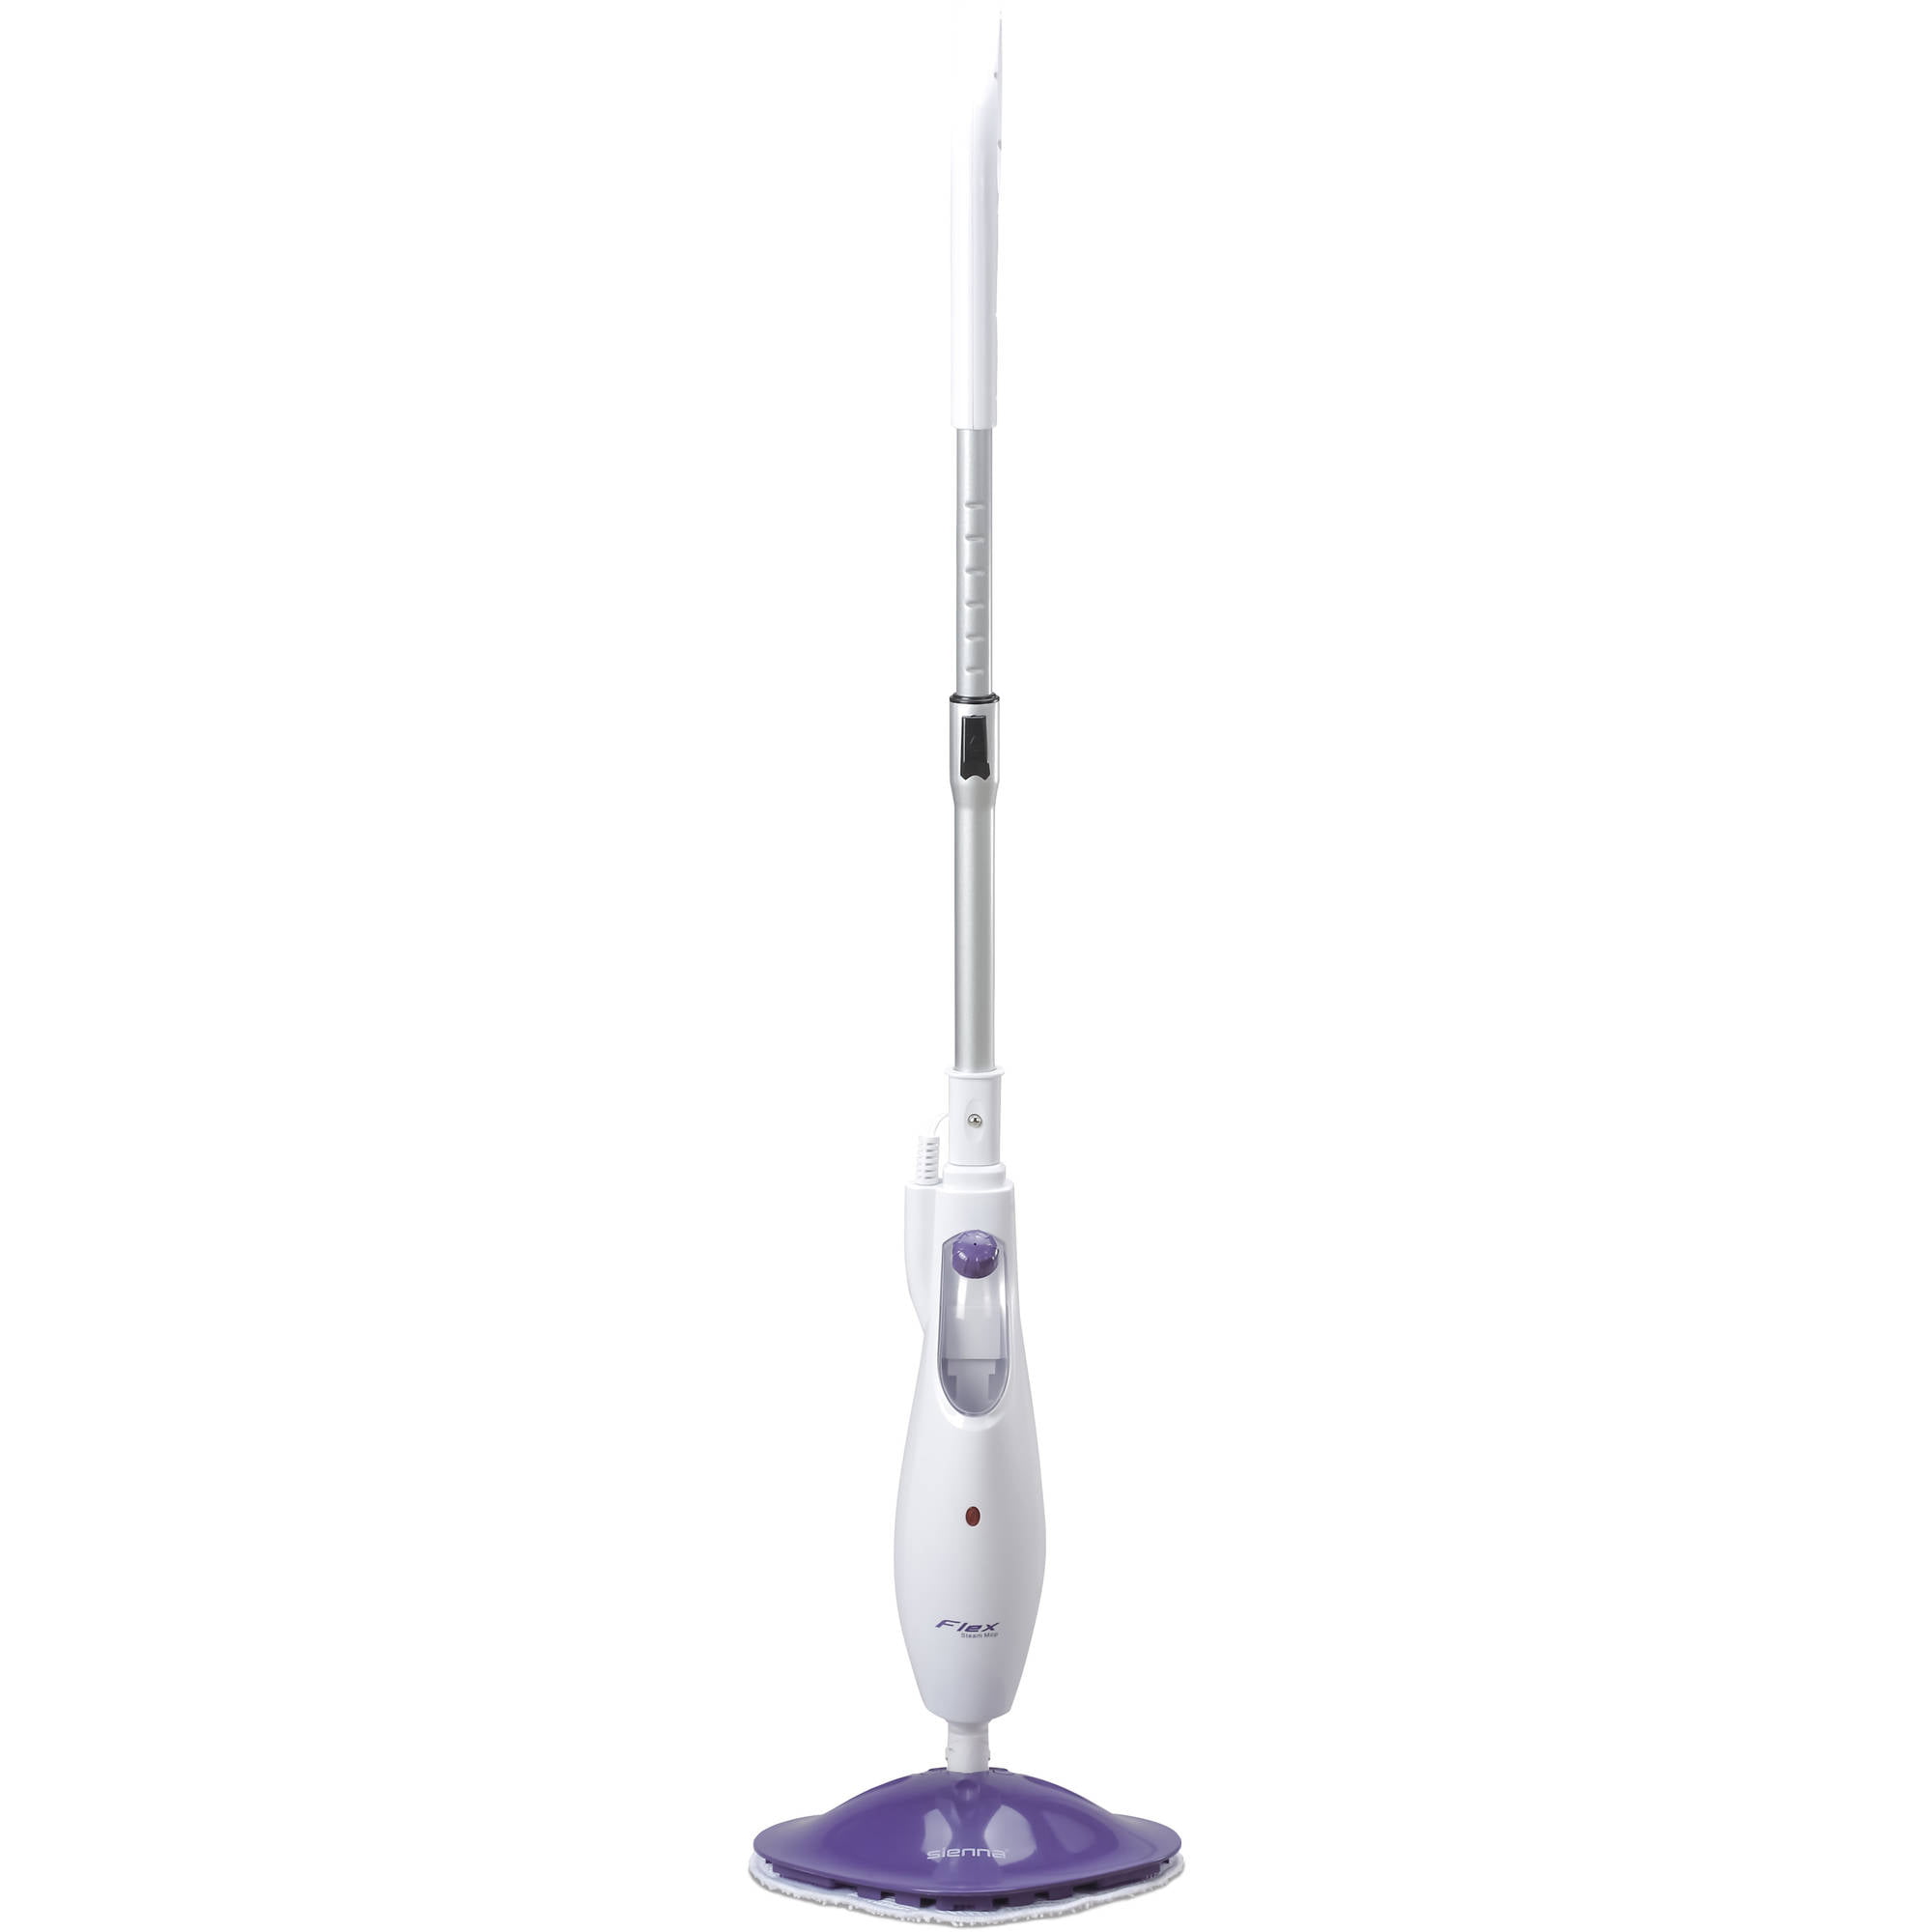 Superheated Vapor Kills Bacteria and Sanitizes Adjustable Height Pocket Mop with 2 Washable Microfiber Cleaning Pads Sienna FLEX Steam Mop and Steam Cleaner 